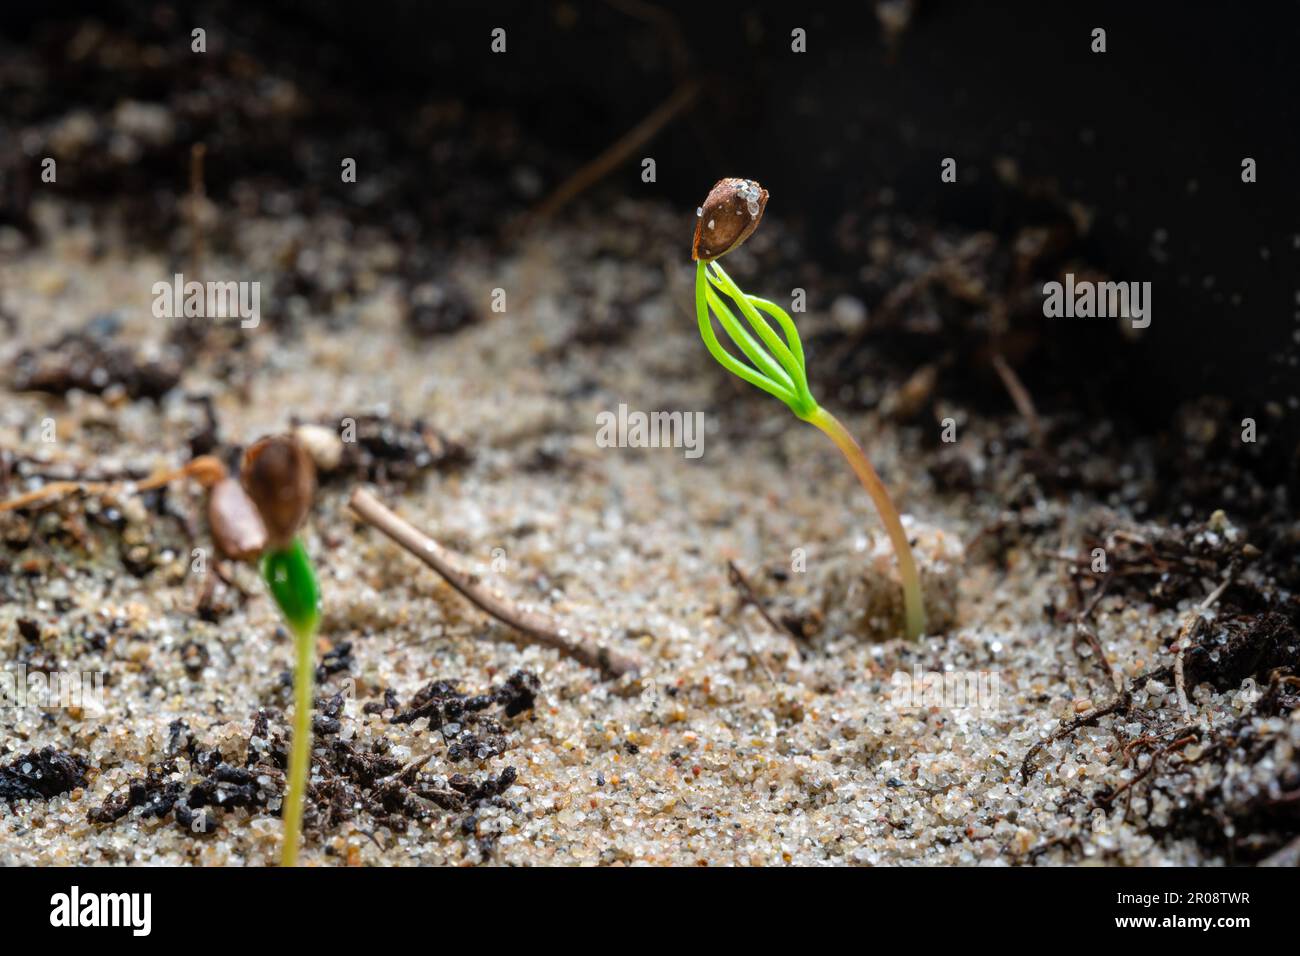 Small newly emerged spruce seedling on the forest floor Stock Photo